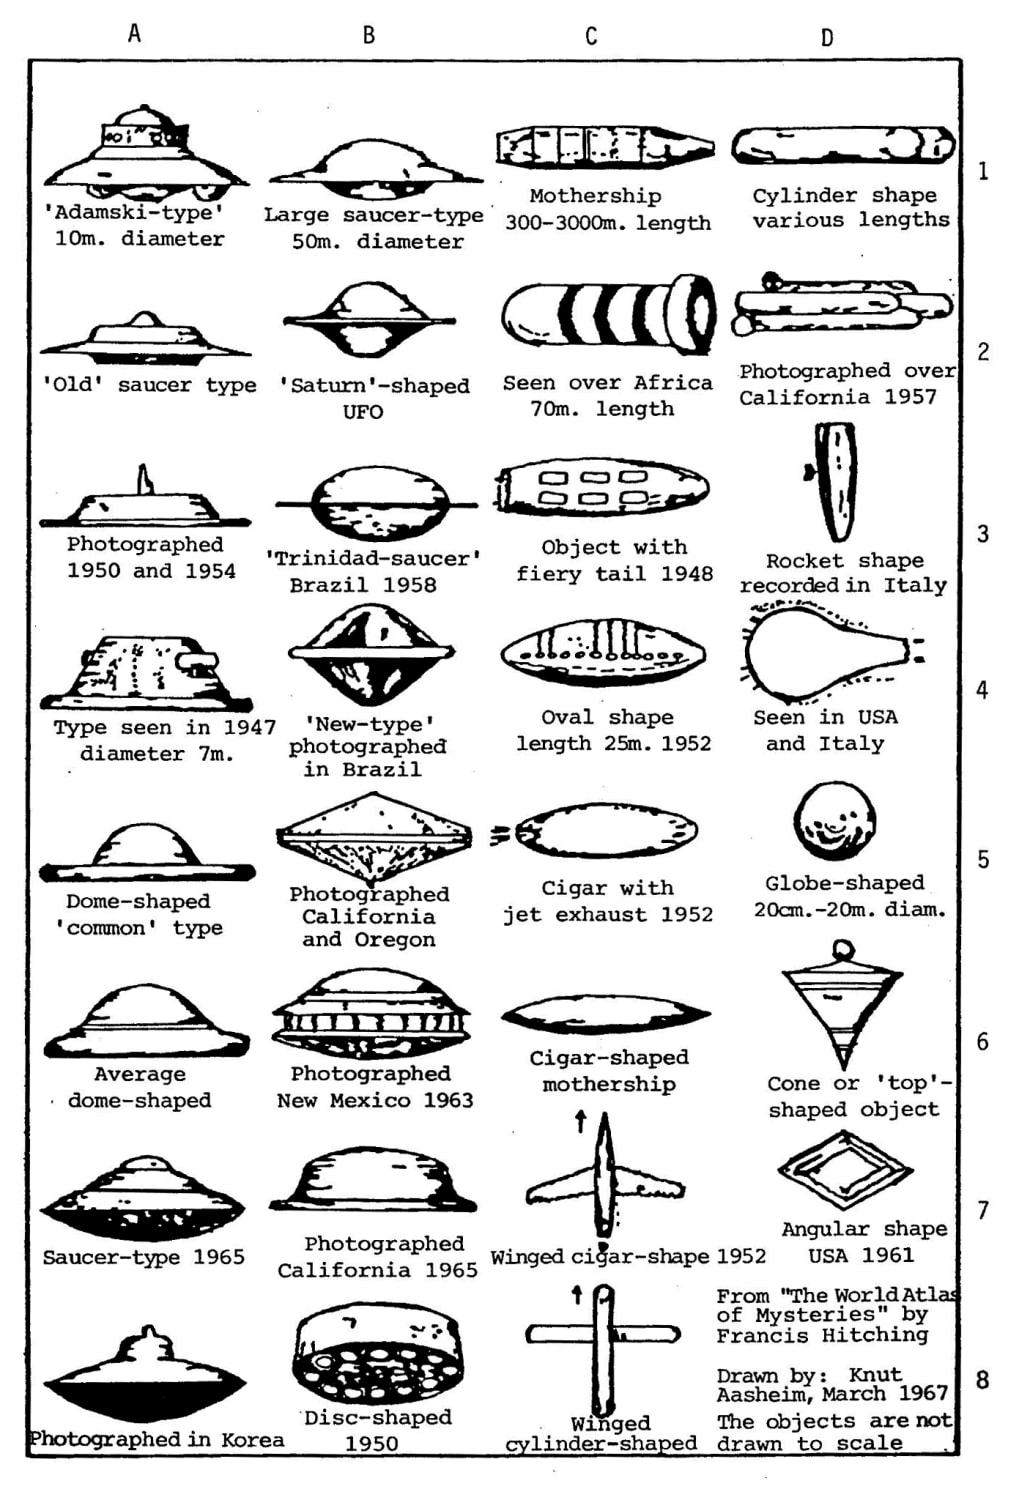 UFOs, 1940s-1960s